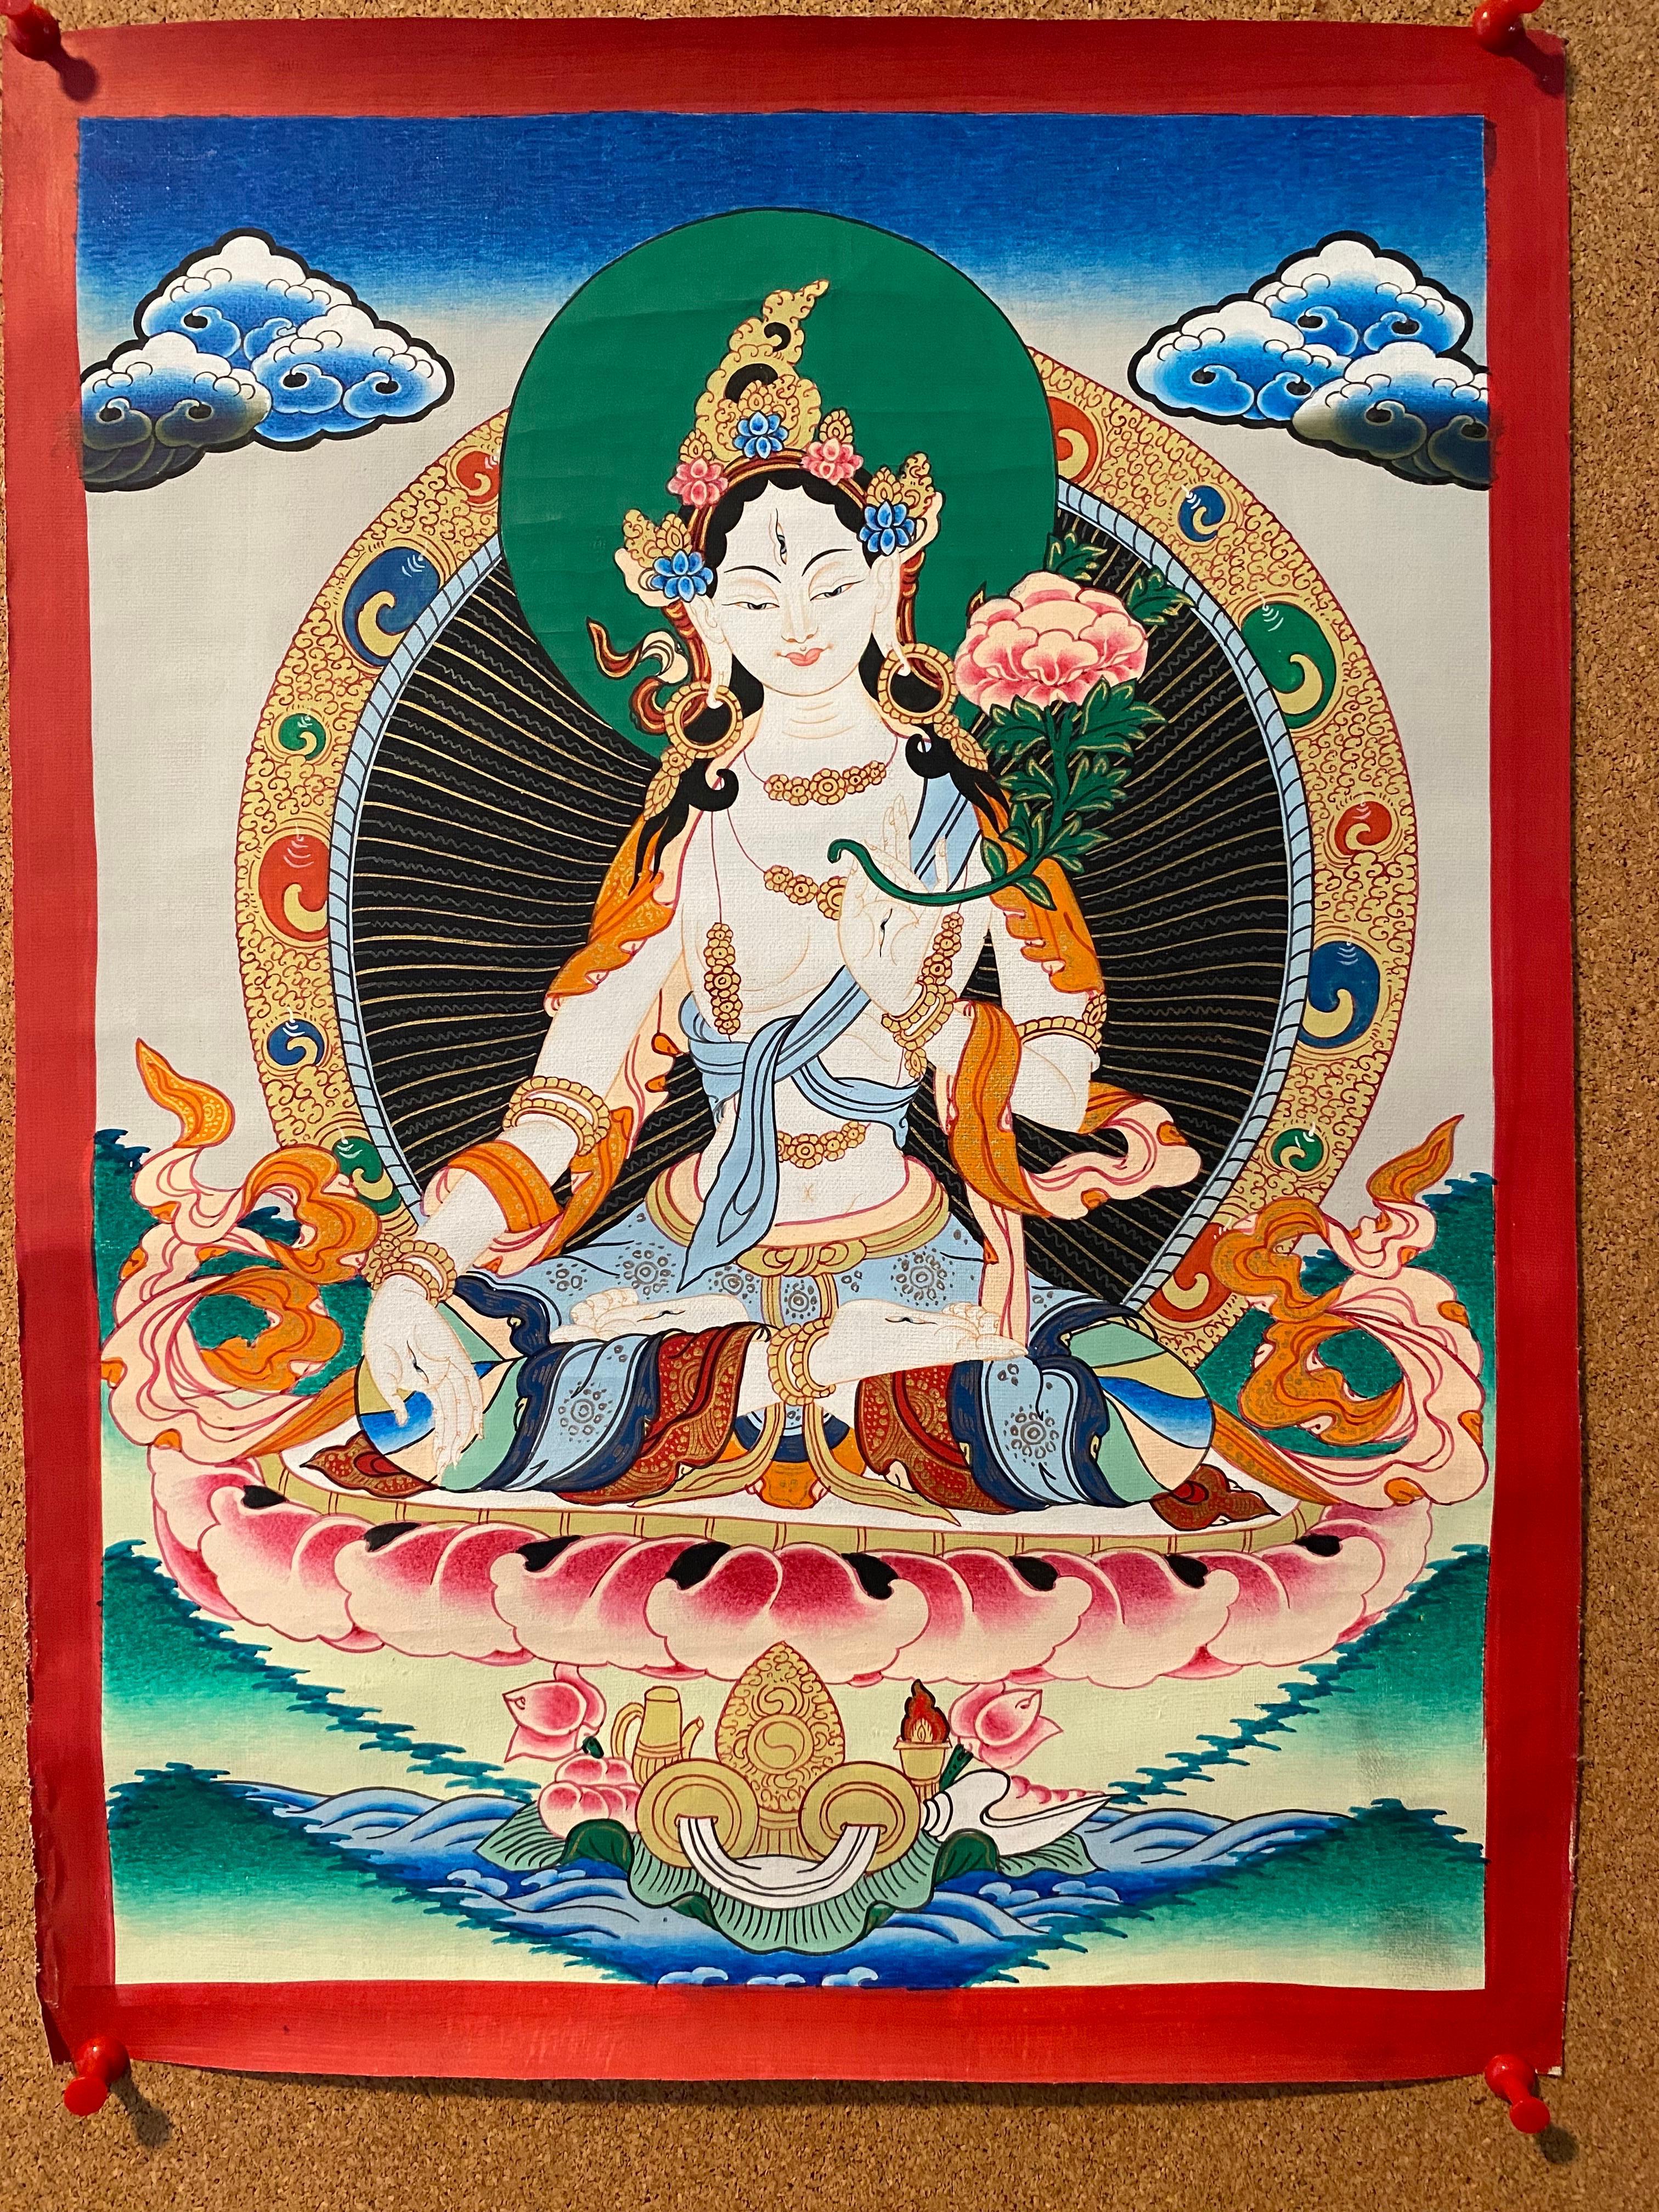 Unframed Hand Painted White Tara Thangka on Canvas 24K Gold - Other Art Style Painting by Unknown